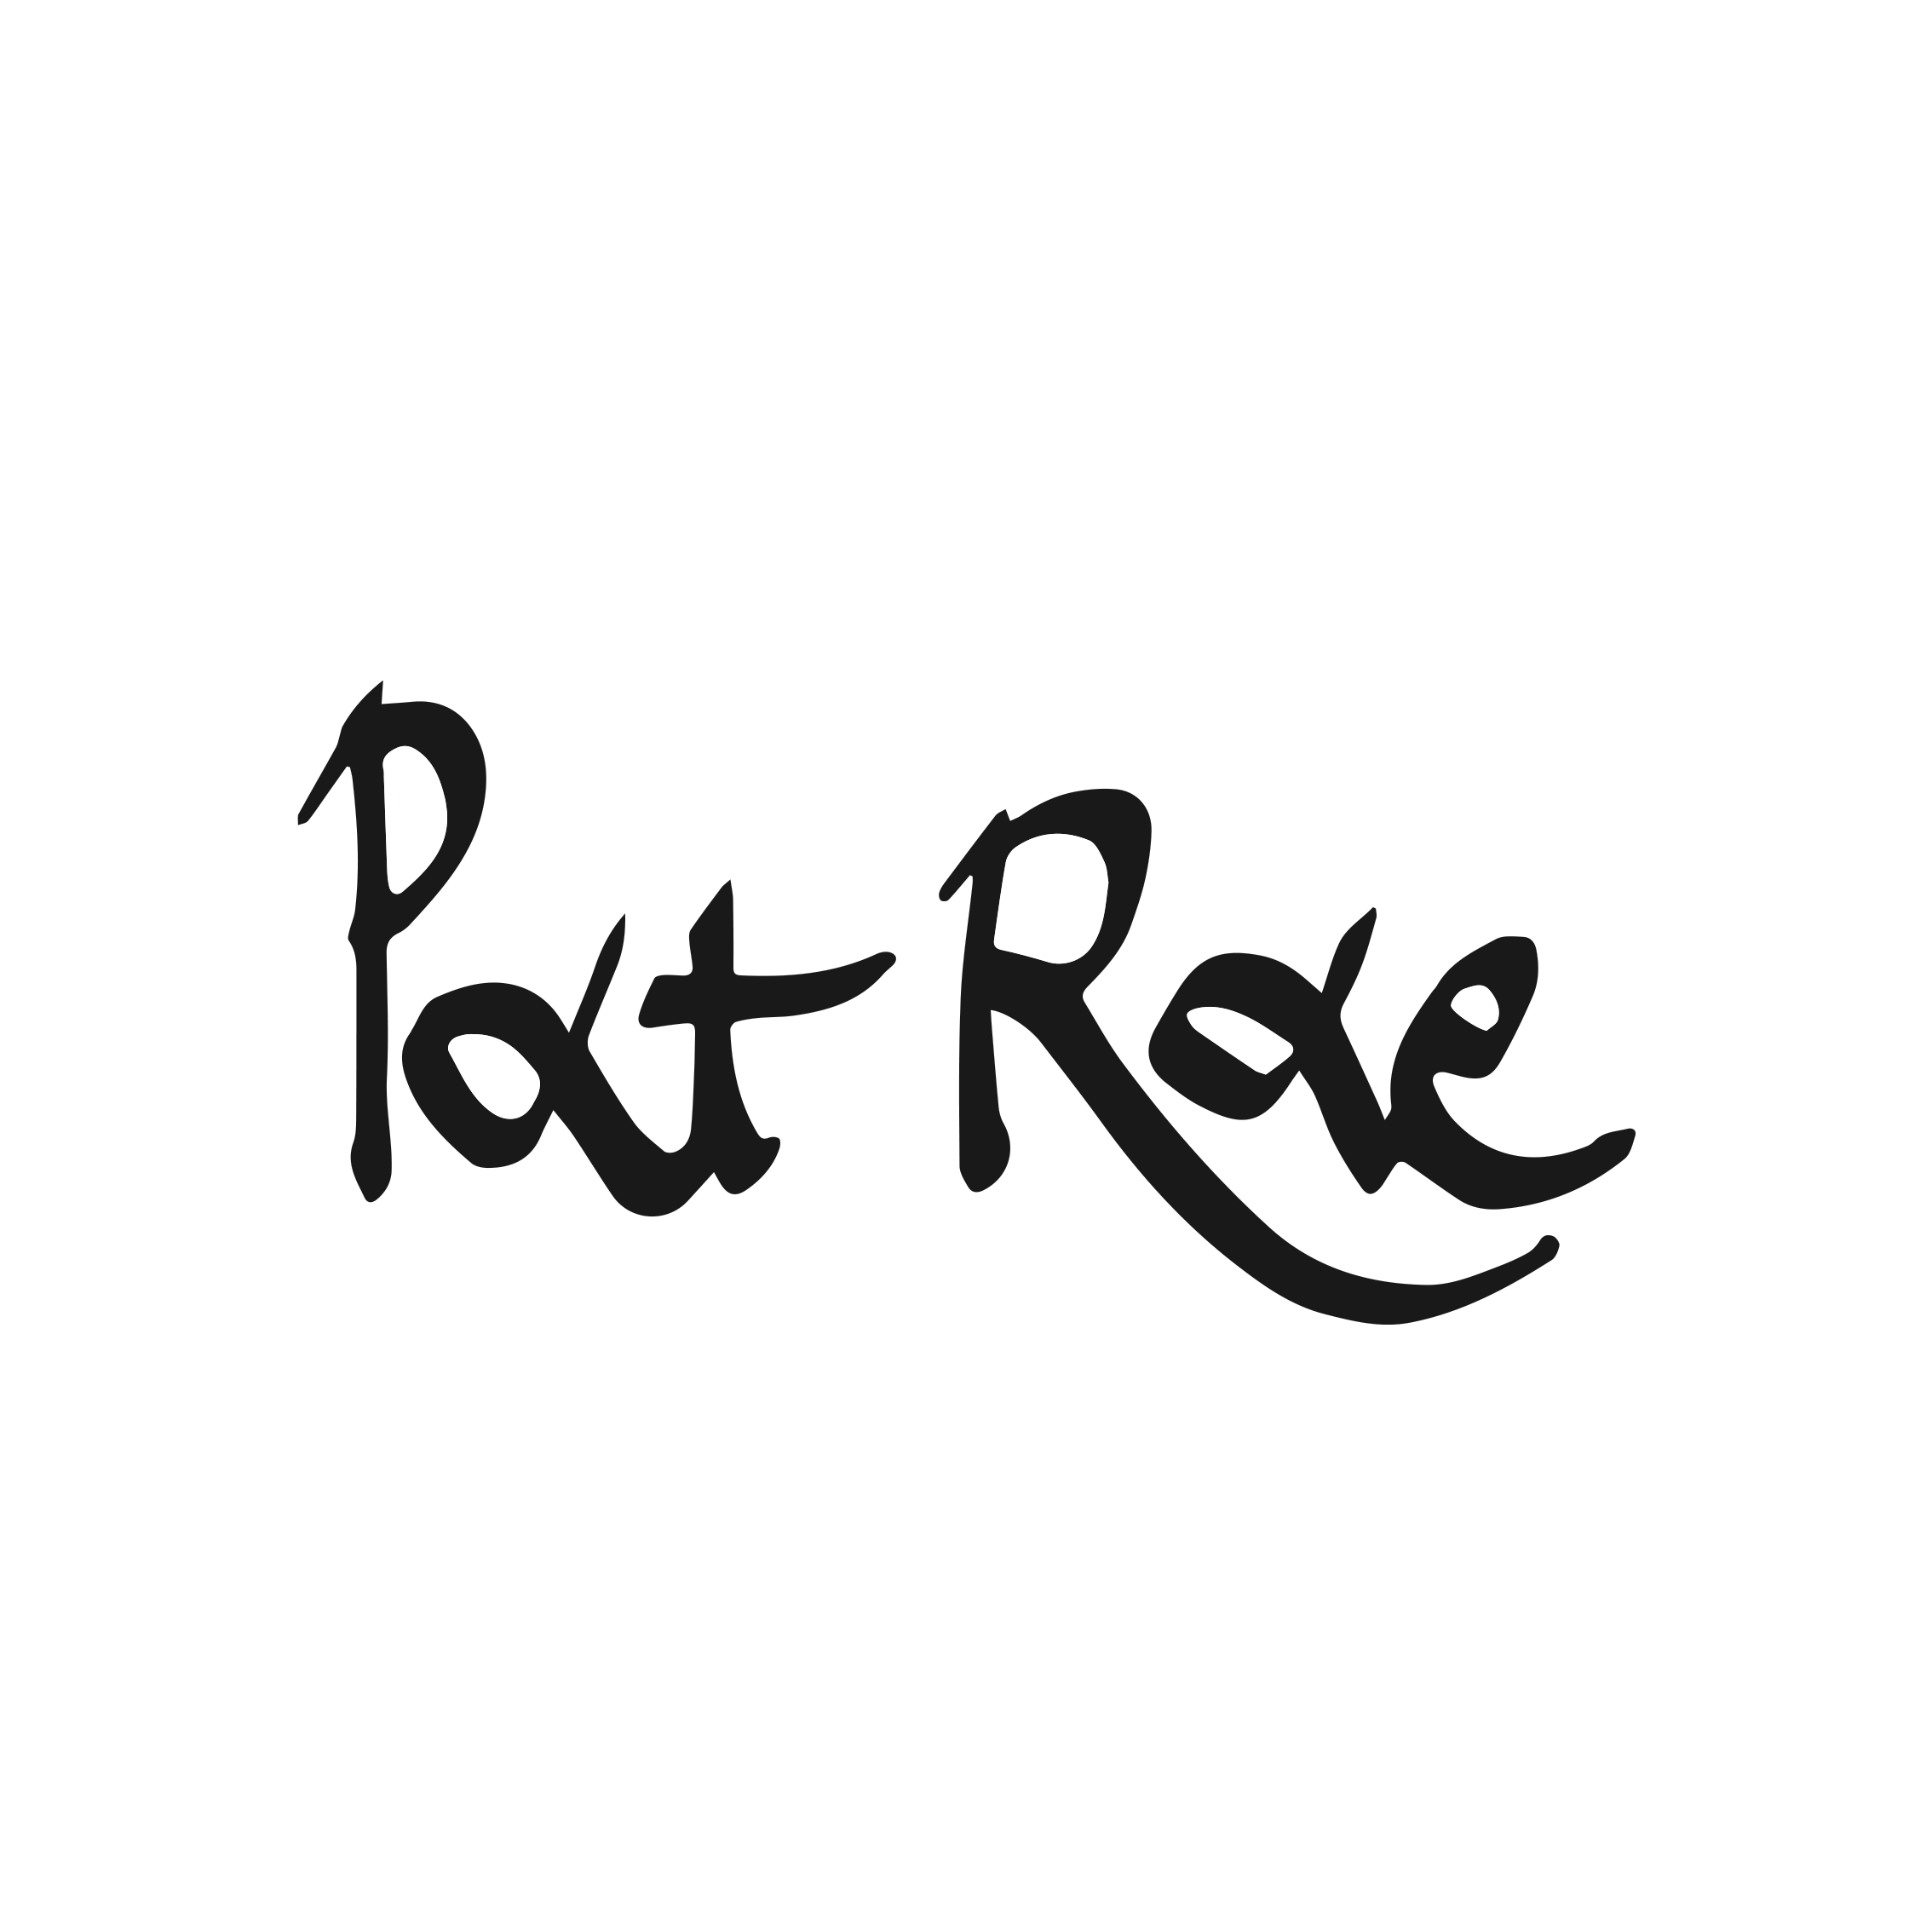 Artist and sculptor Pat Rae logo based on her signature designed by Yeswaydesign